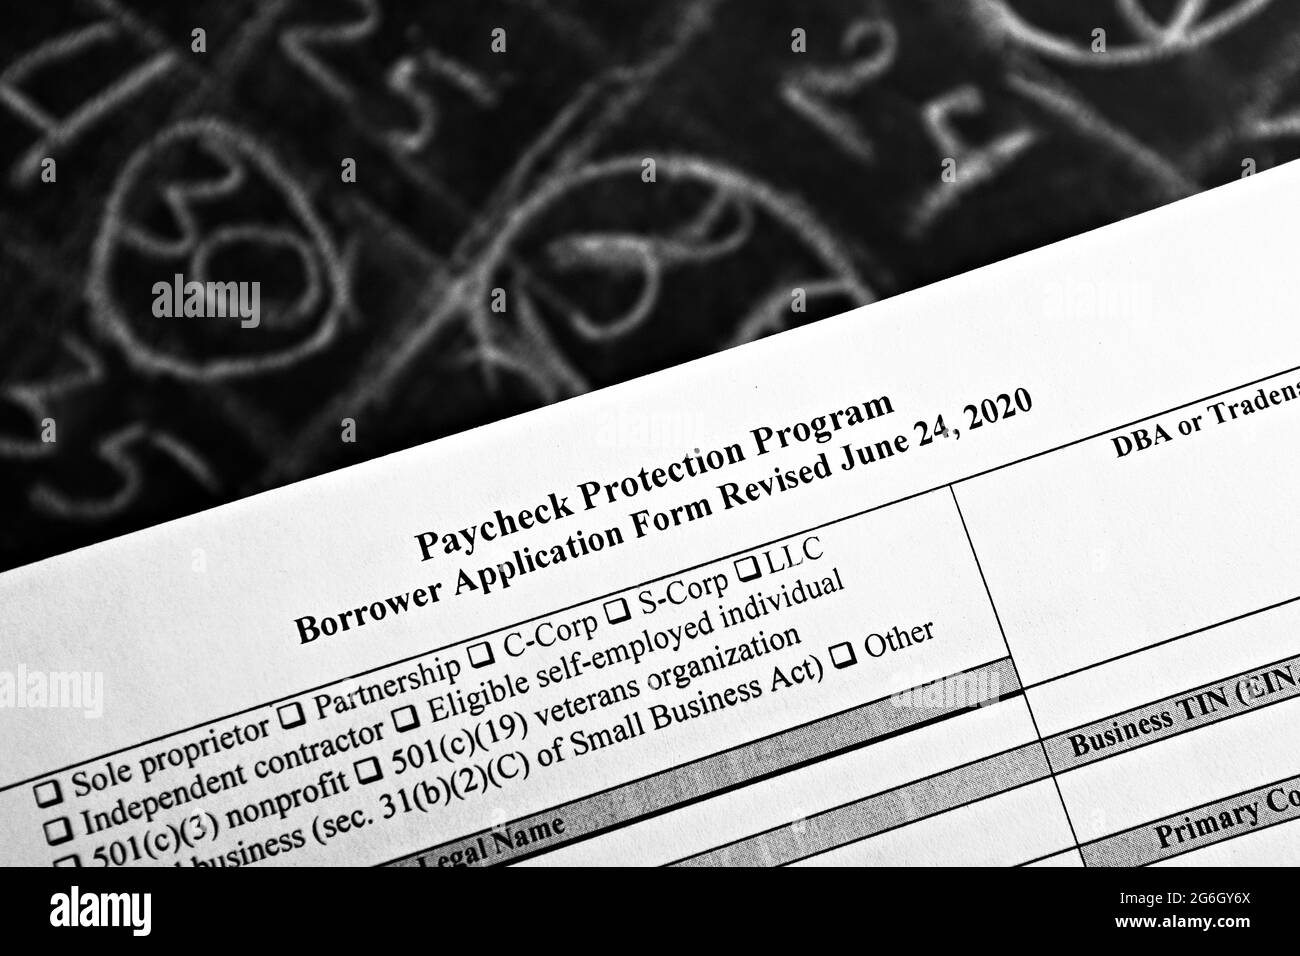 selective focus monochrome photo of paycheck protection program borrower application form revised, on a background of chalk board with numbers Stock Photo